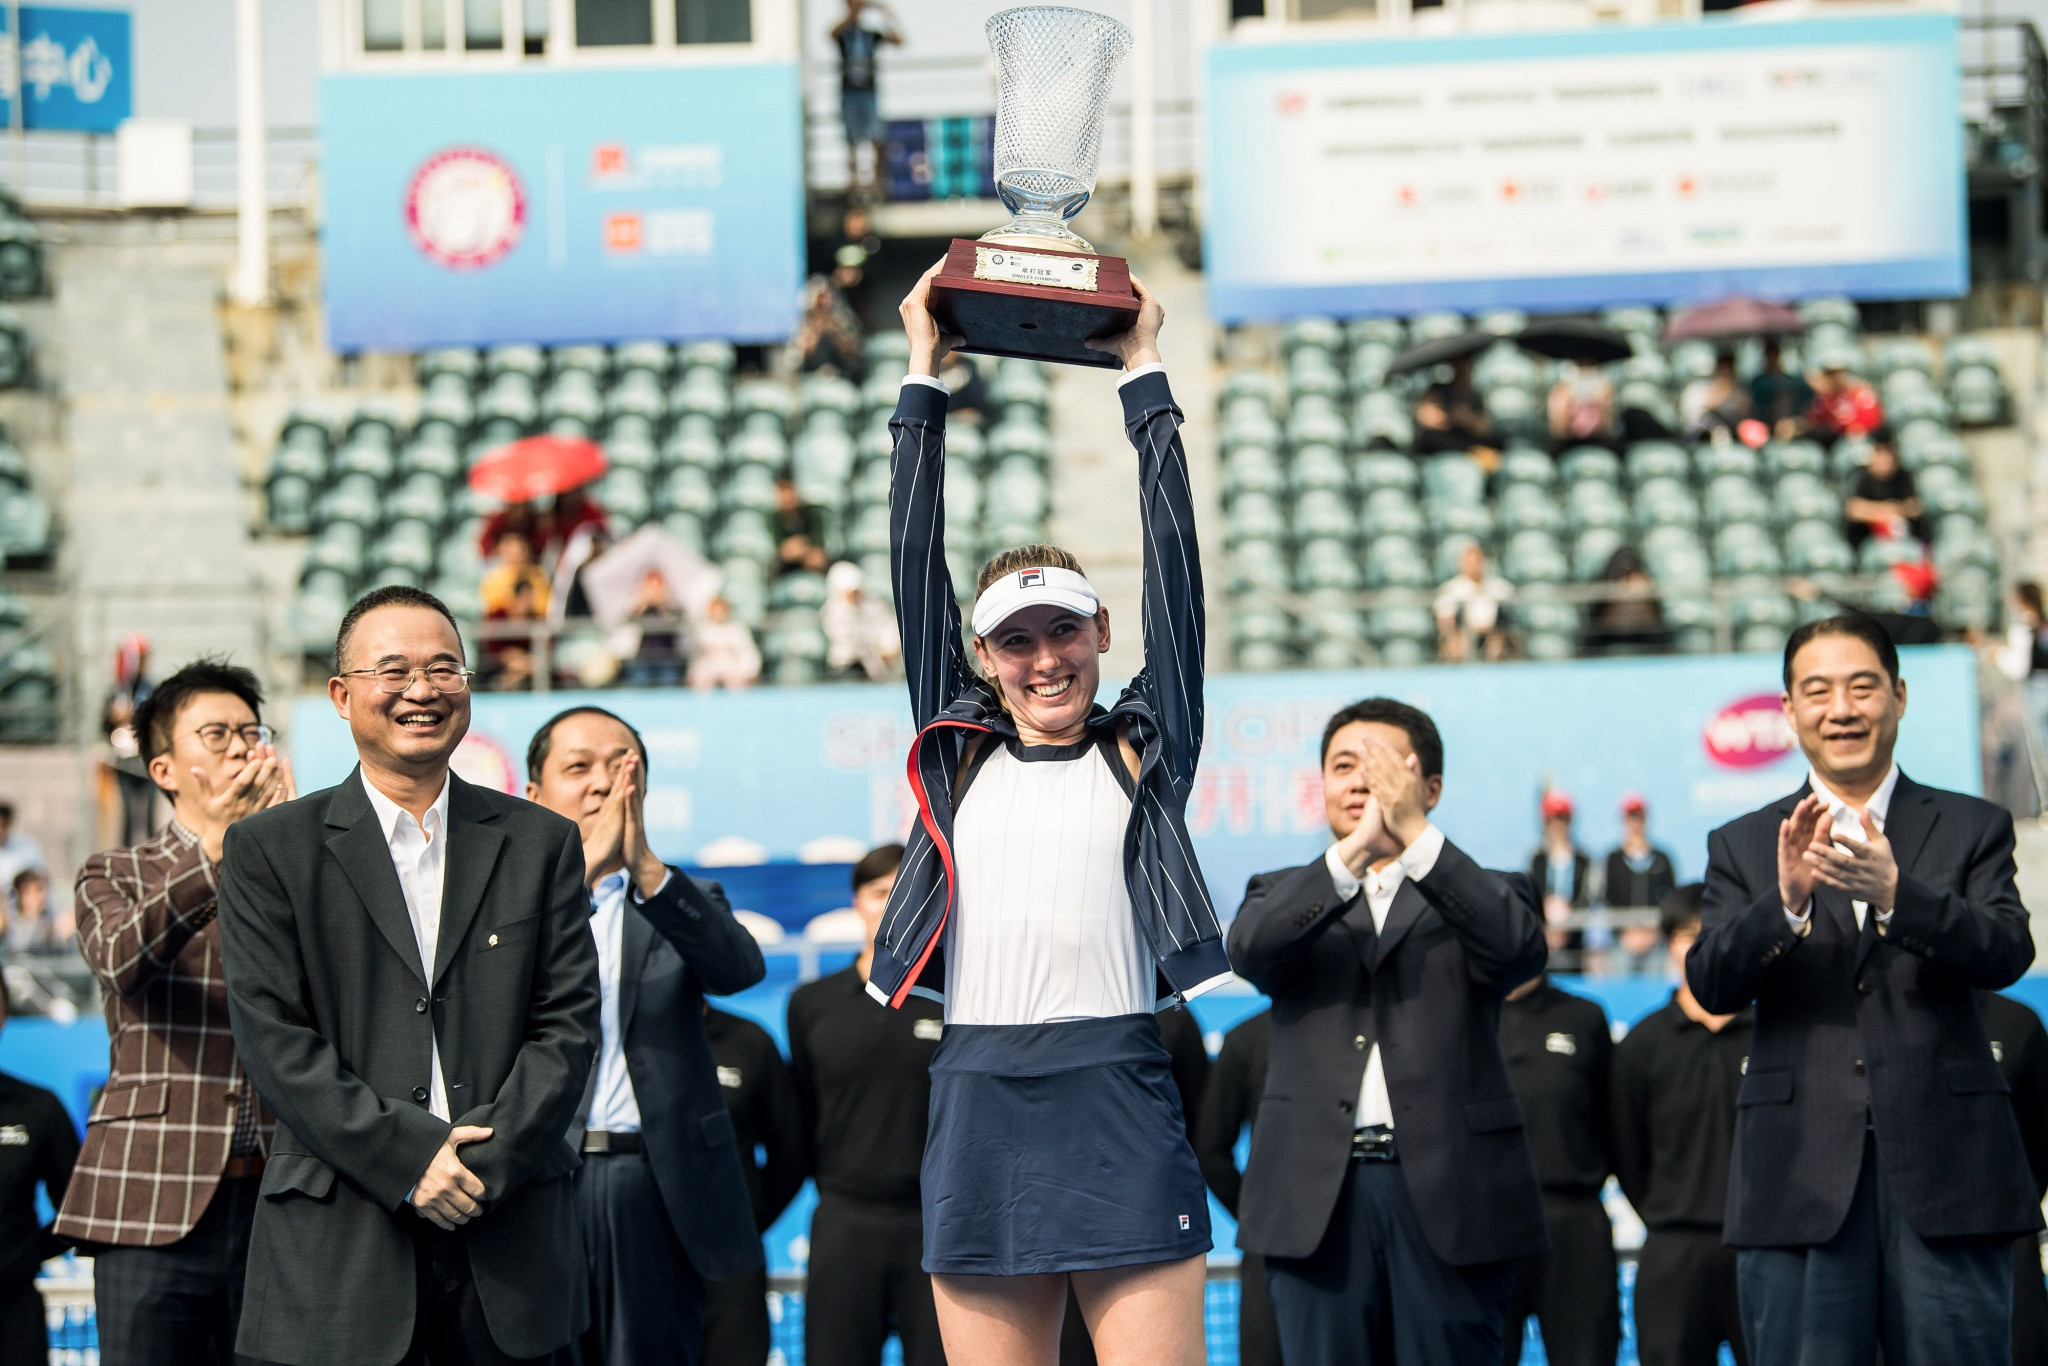 Ekaterina Alexandrova won the Shenzhen Open when it was last staged in 2020 ©Getty Images